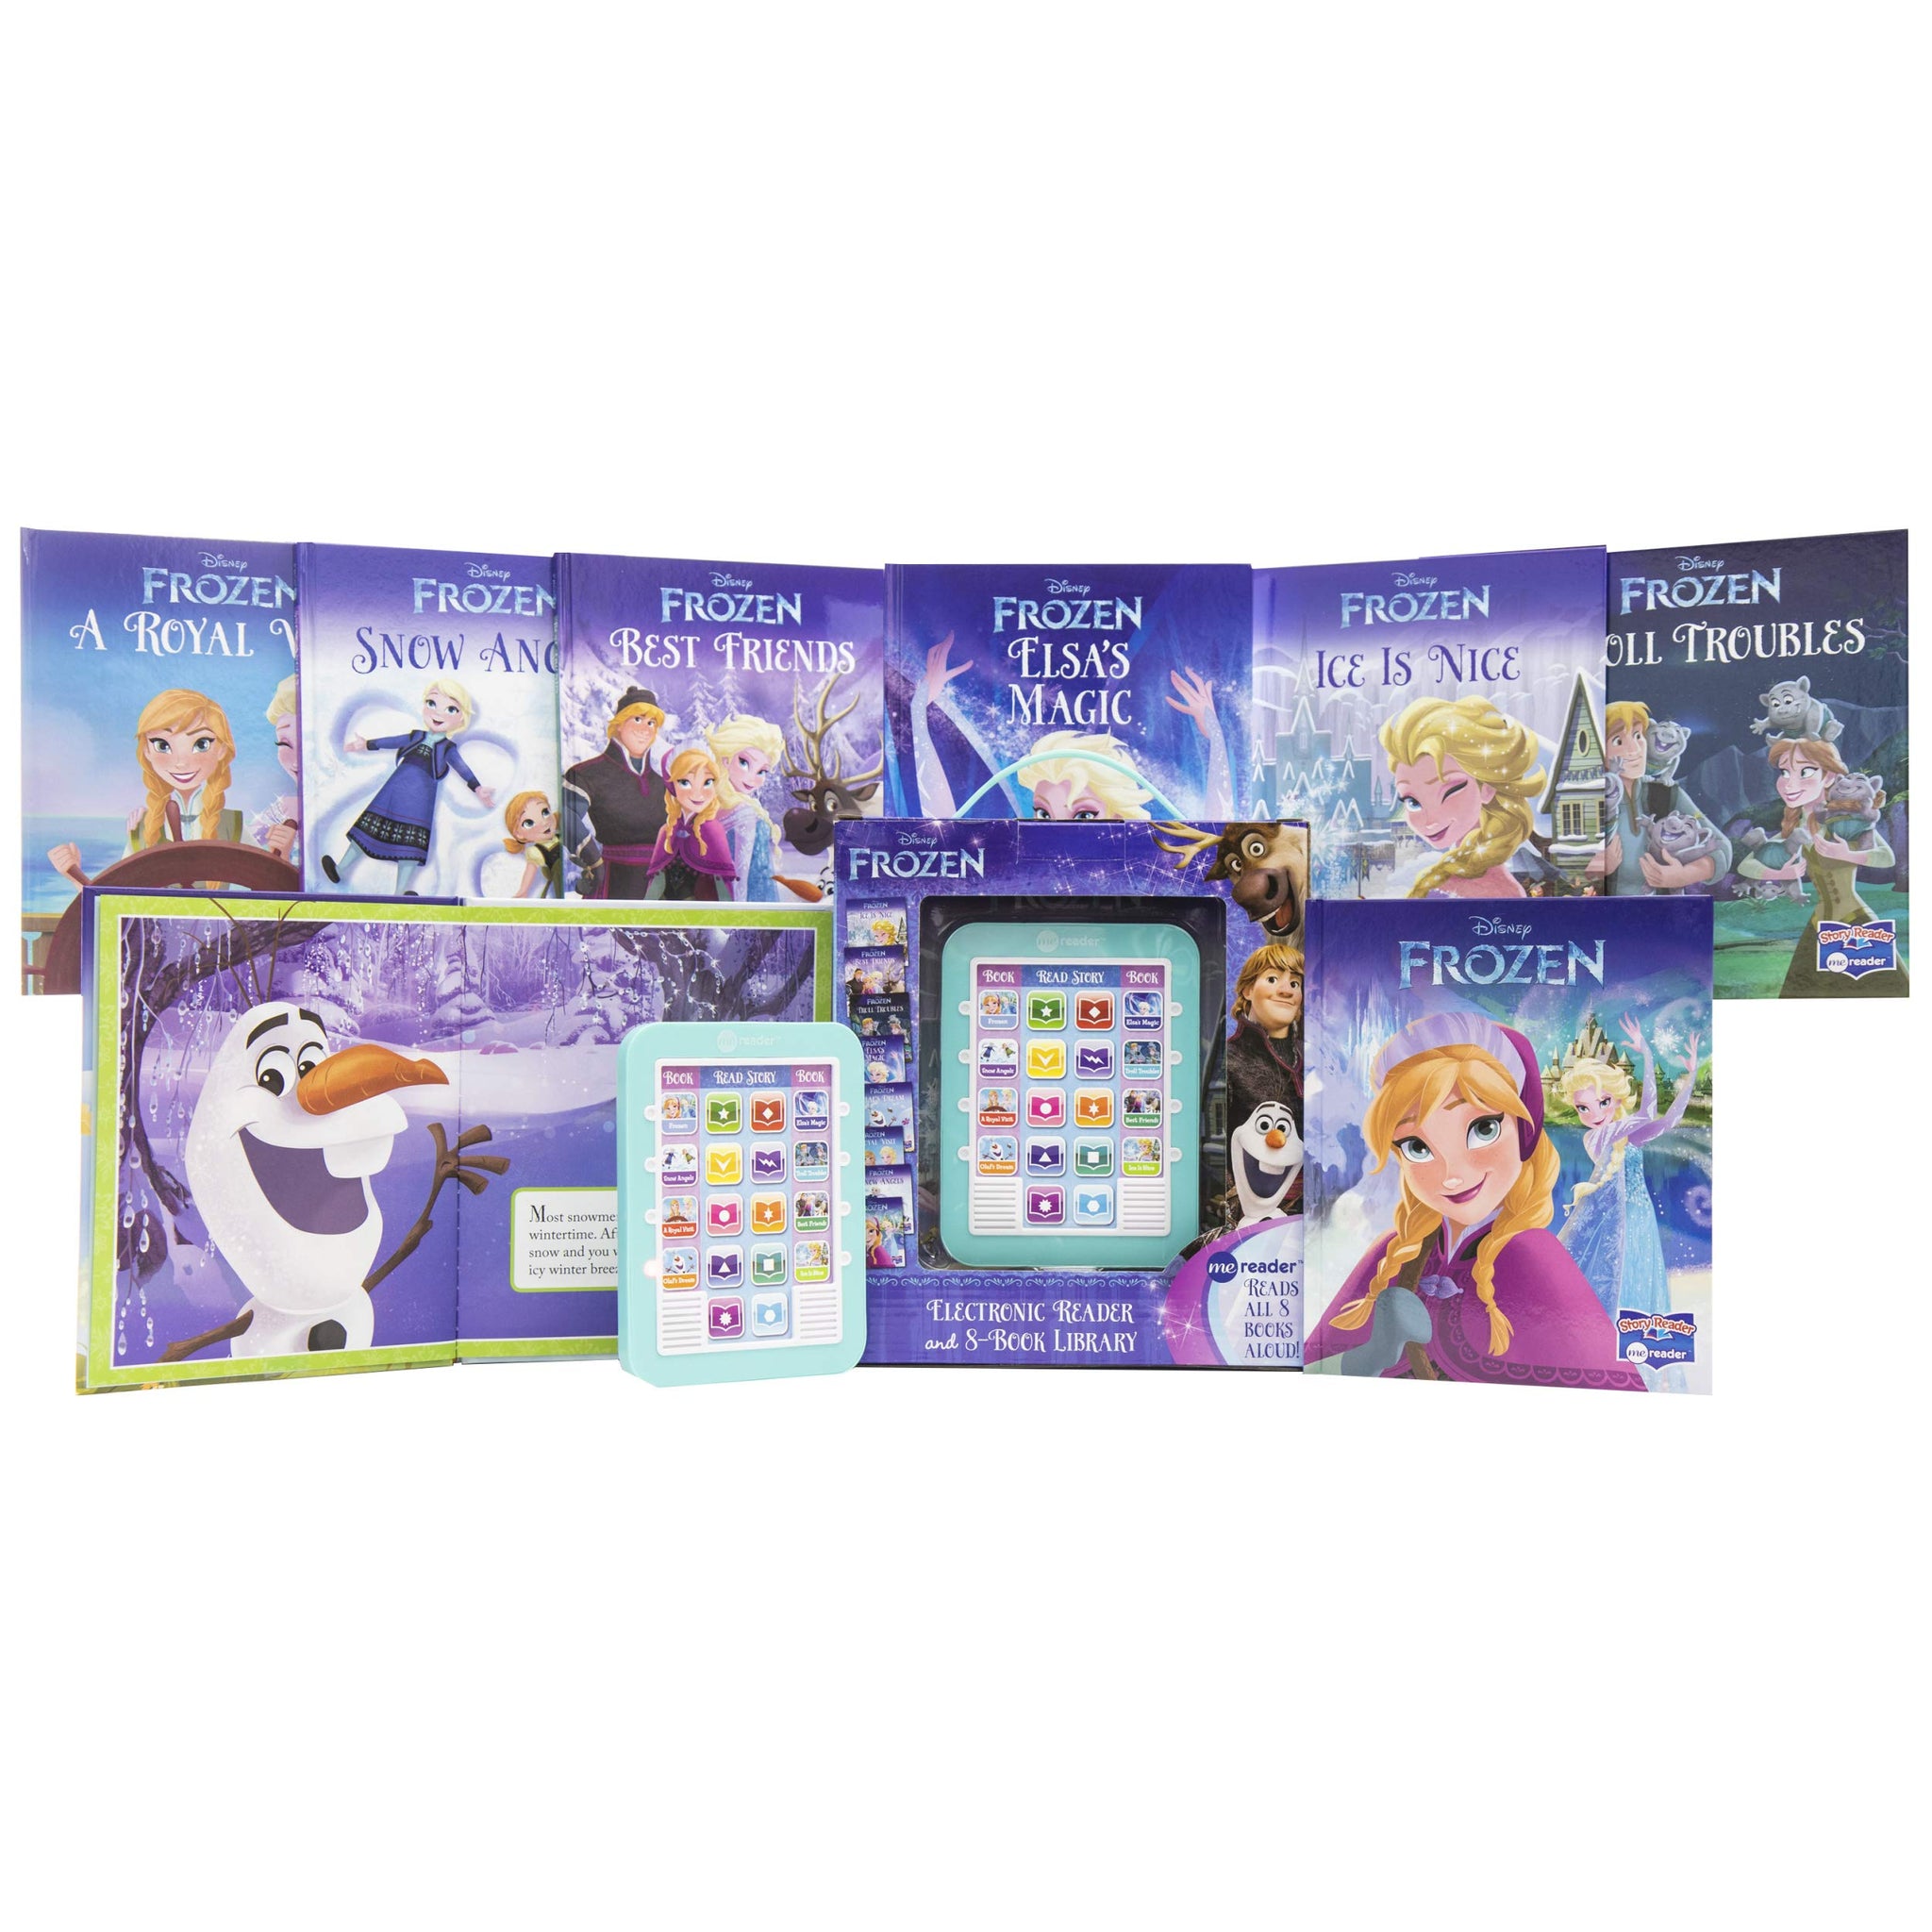 Disney Frozen Electronic Reader and 8-Sound Book Library just $14.06 from Amazon {Regularly $32.99}!